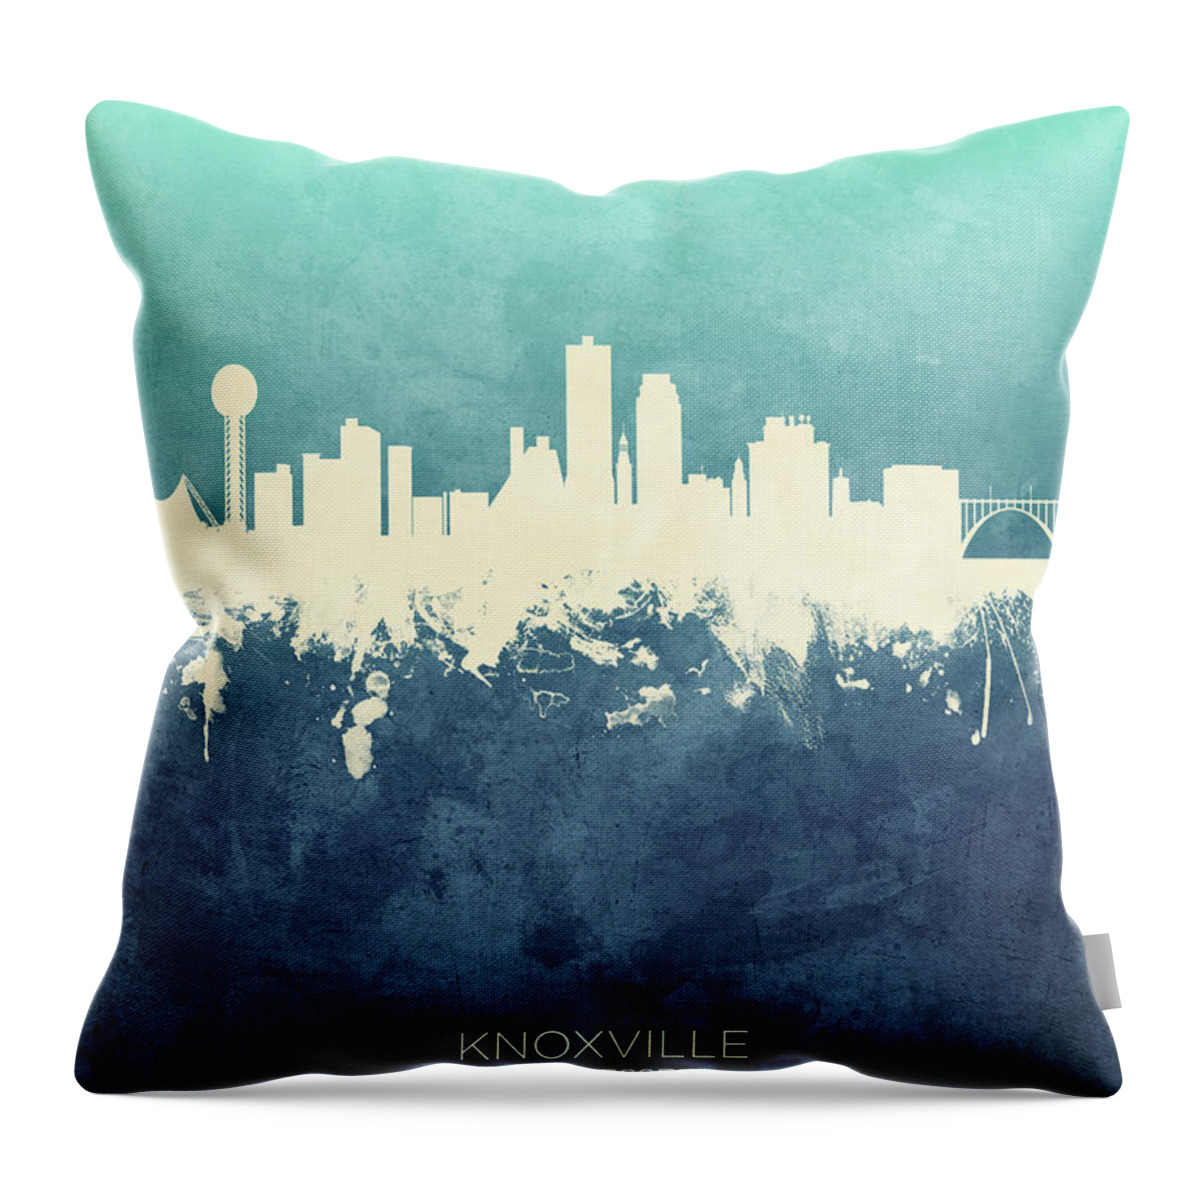 Knoxville Throw Pillow featuring the digital art Knoxville Tennessee Skyline #18 by Michael Tompsett